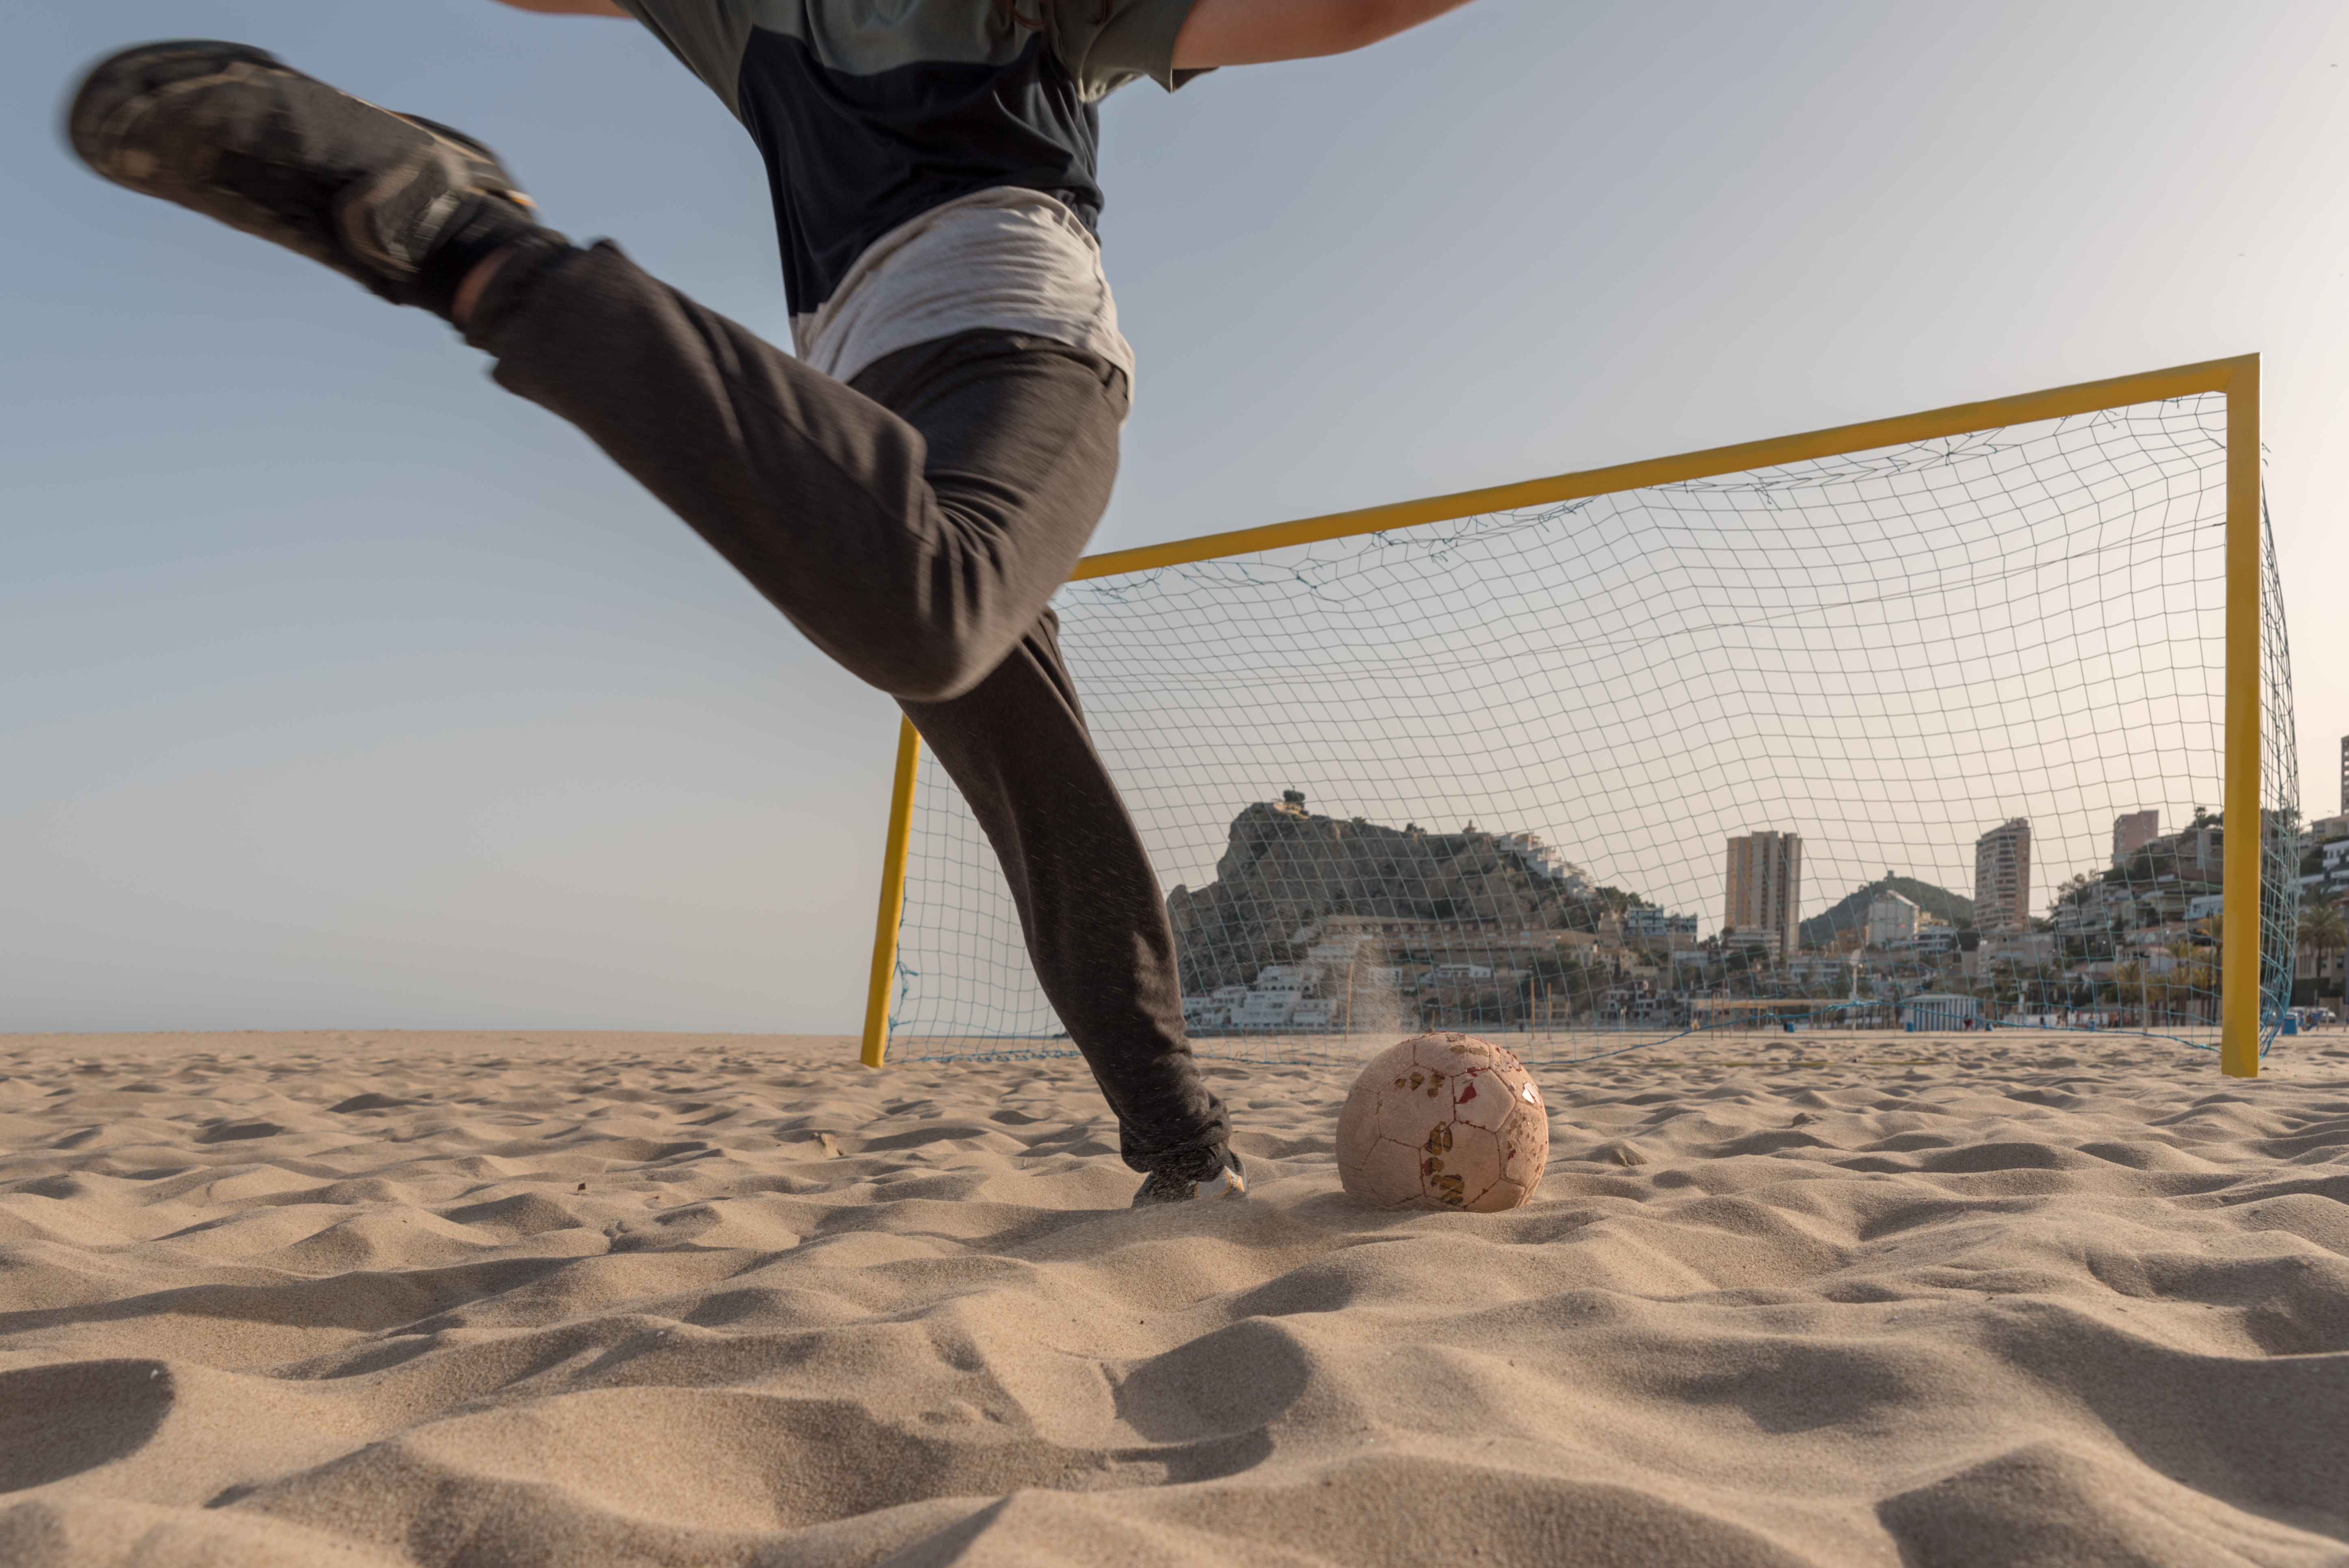 Beach soccer tournament starts in Tarnow. Six games scheduled on Tuesday